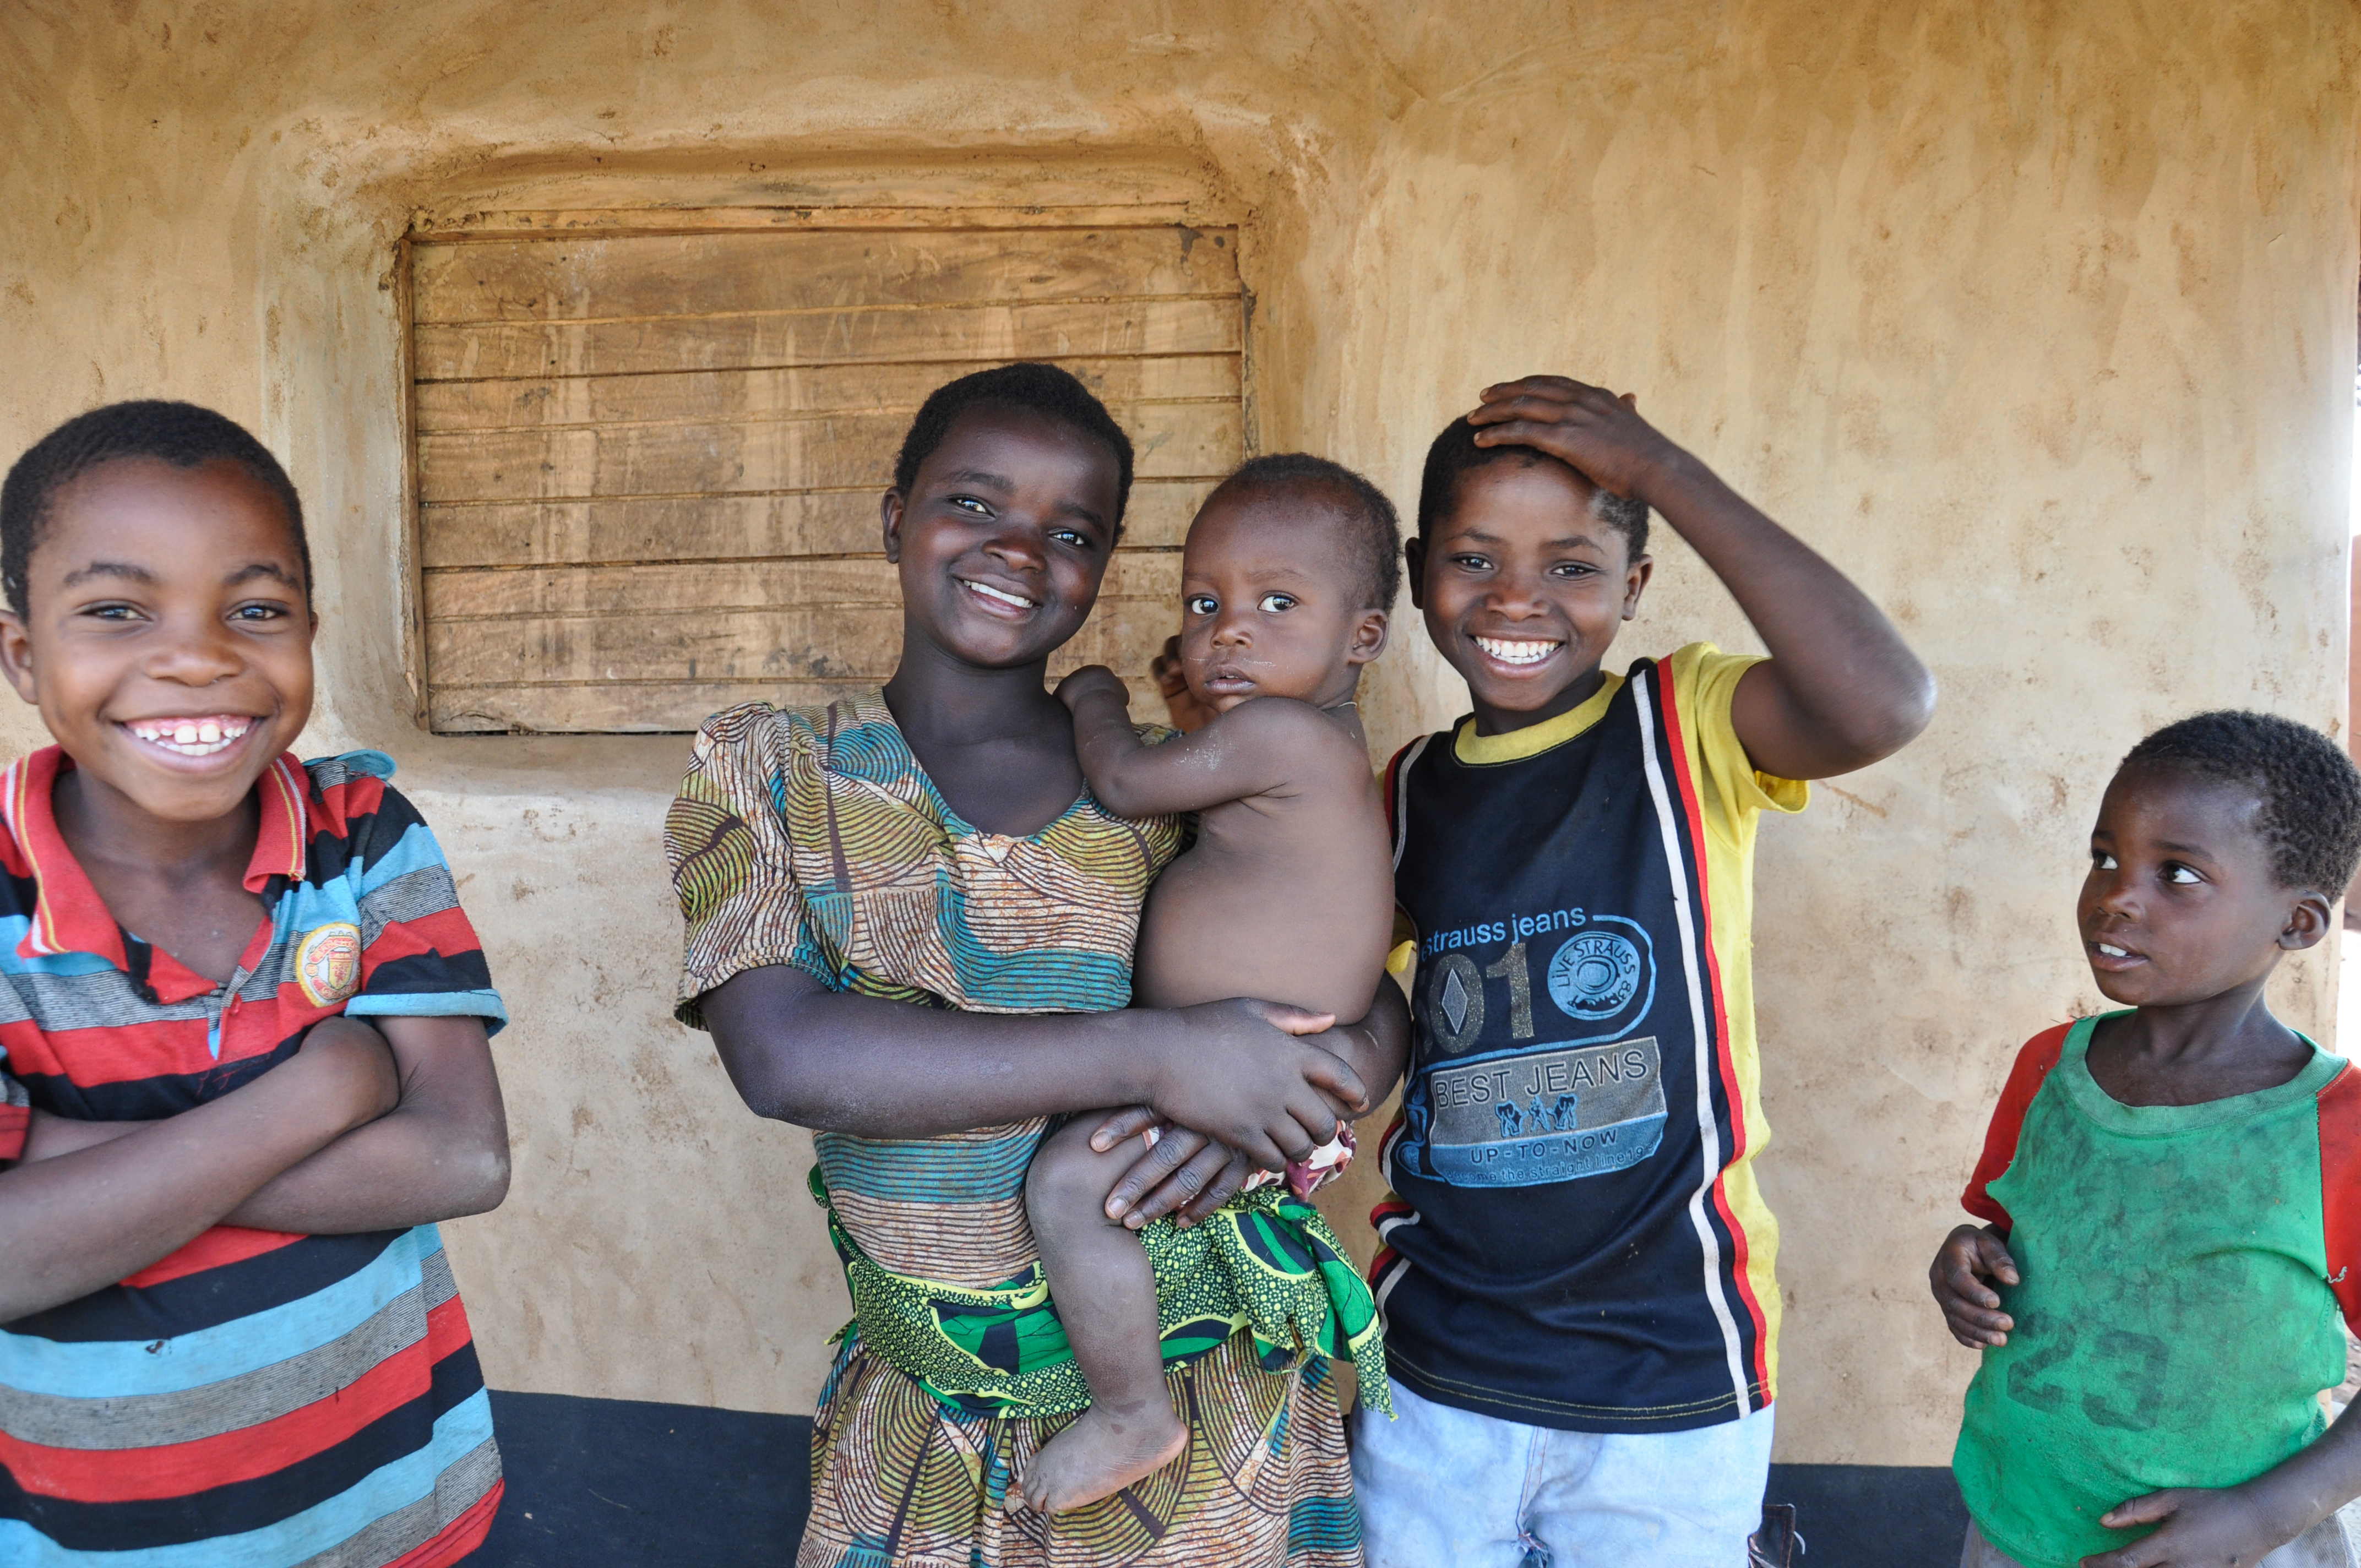 Smiling Malawian family with an infant